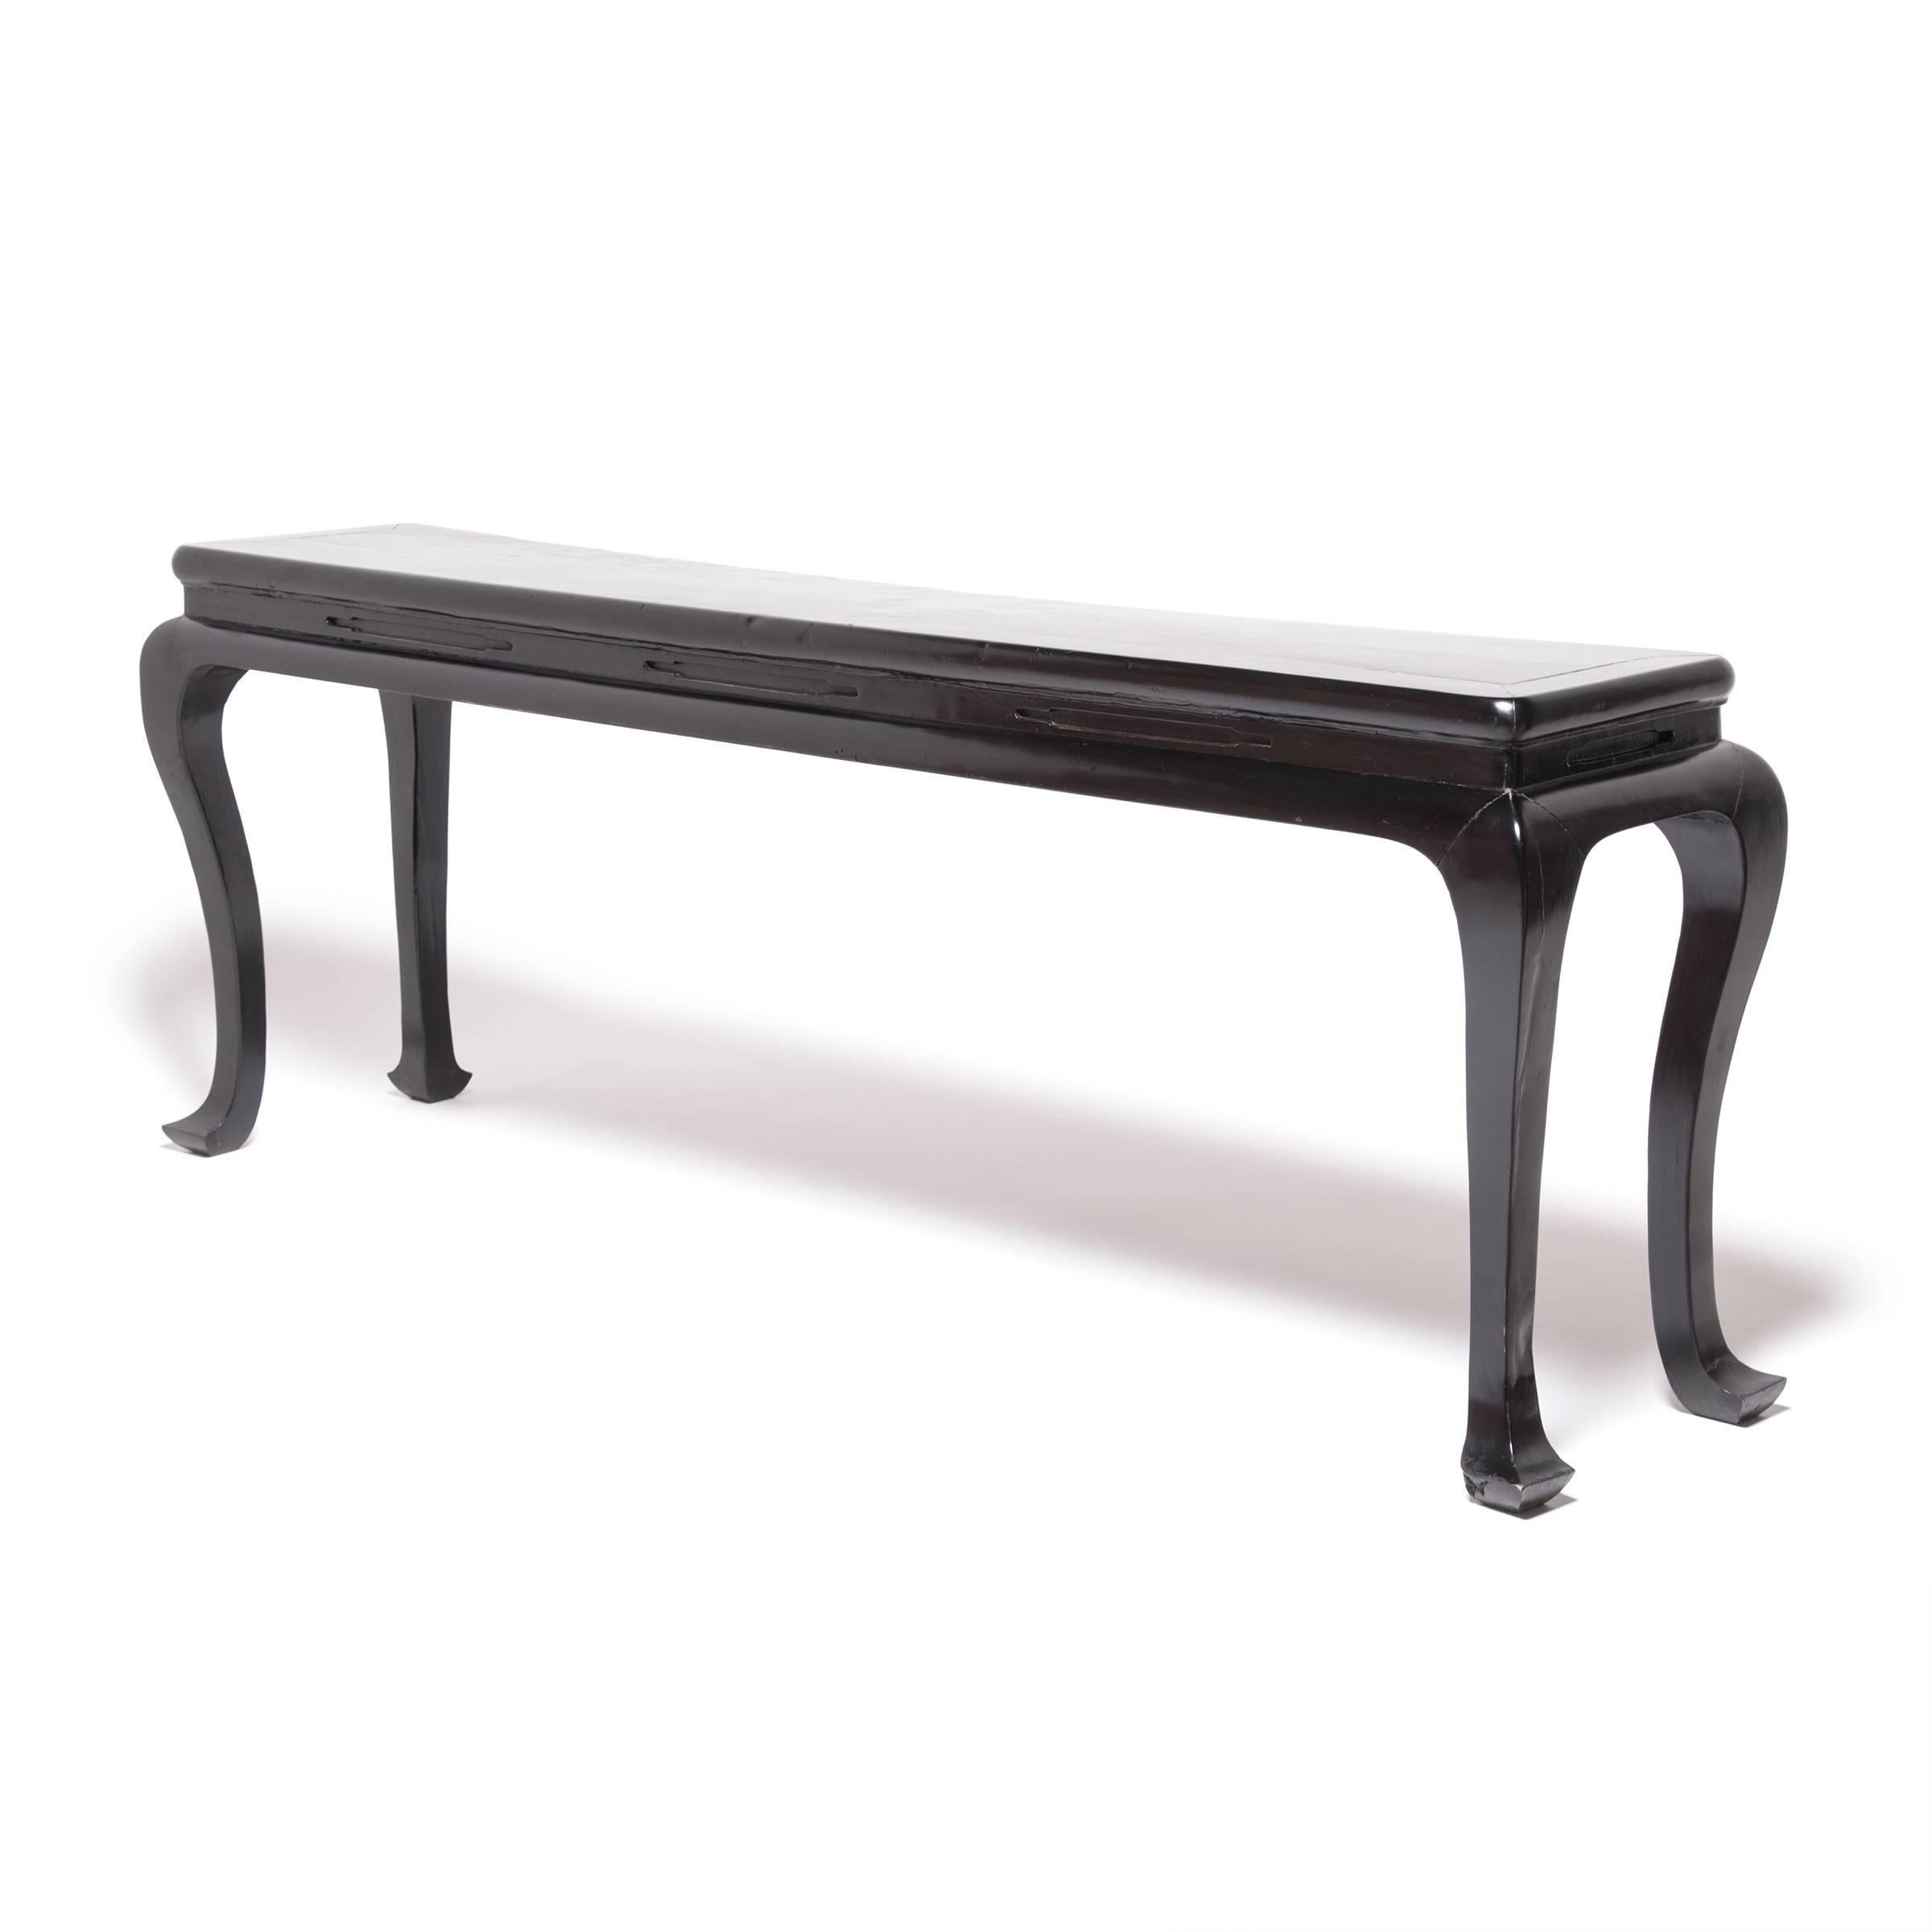 With deceptively simple design, this altar table demonstrates the power of a well-executed curve. Conforming to the minimal aesthetic of Ming-dynasty furniture, this 19th century table breaks away from strict linearity with legs that swell out from